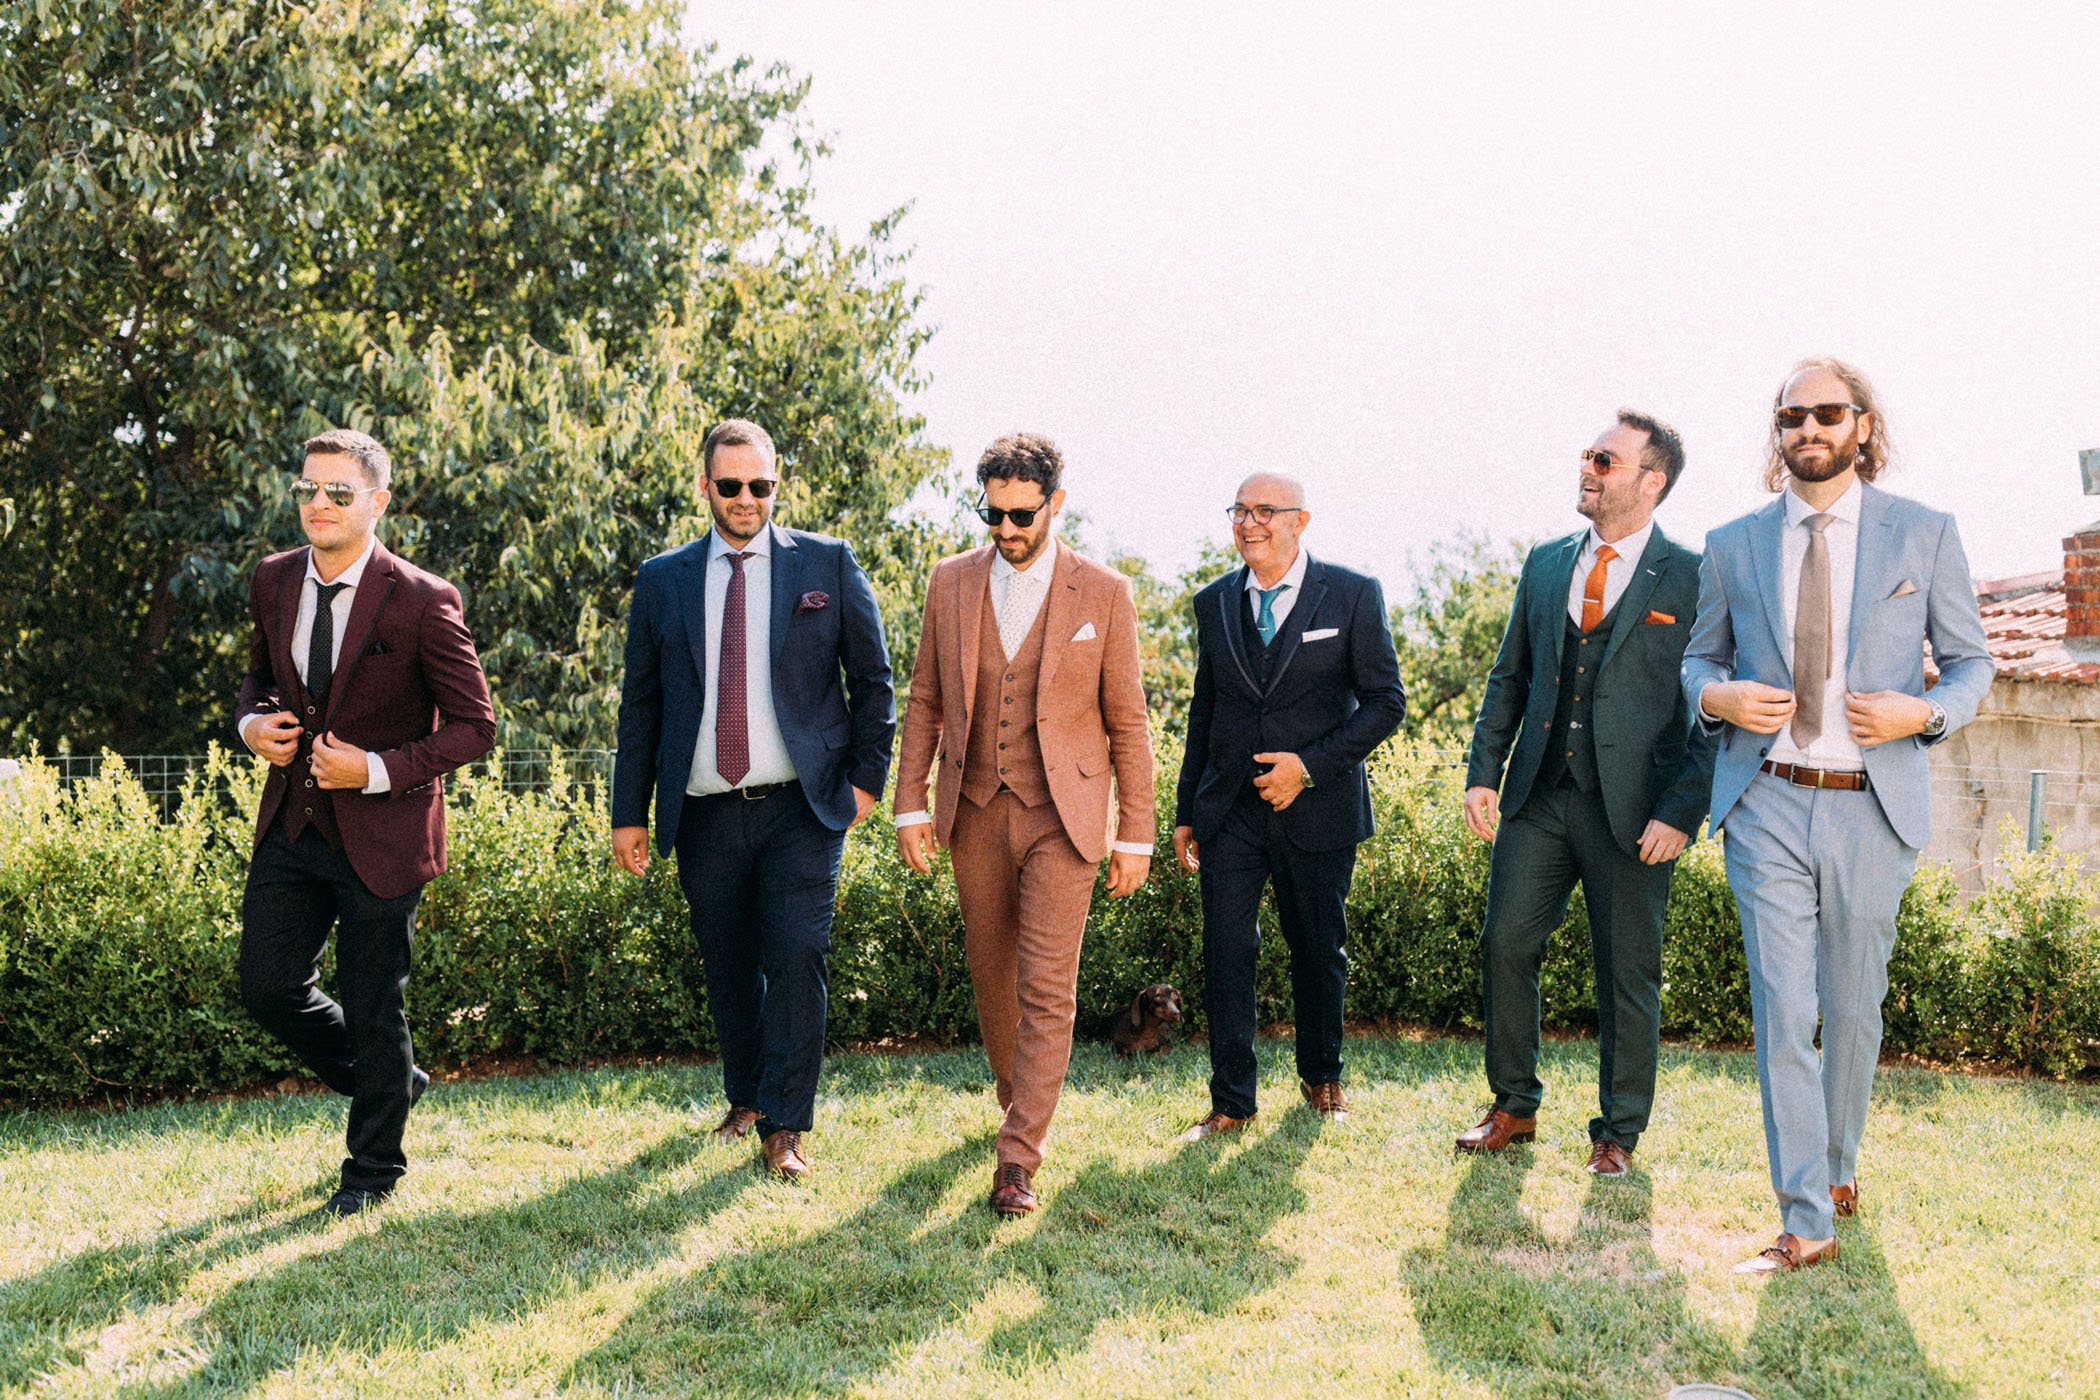 groom and groomsmen in mismatched suits